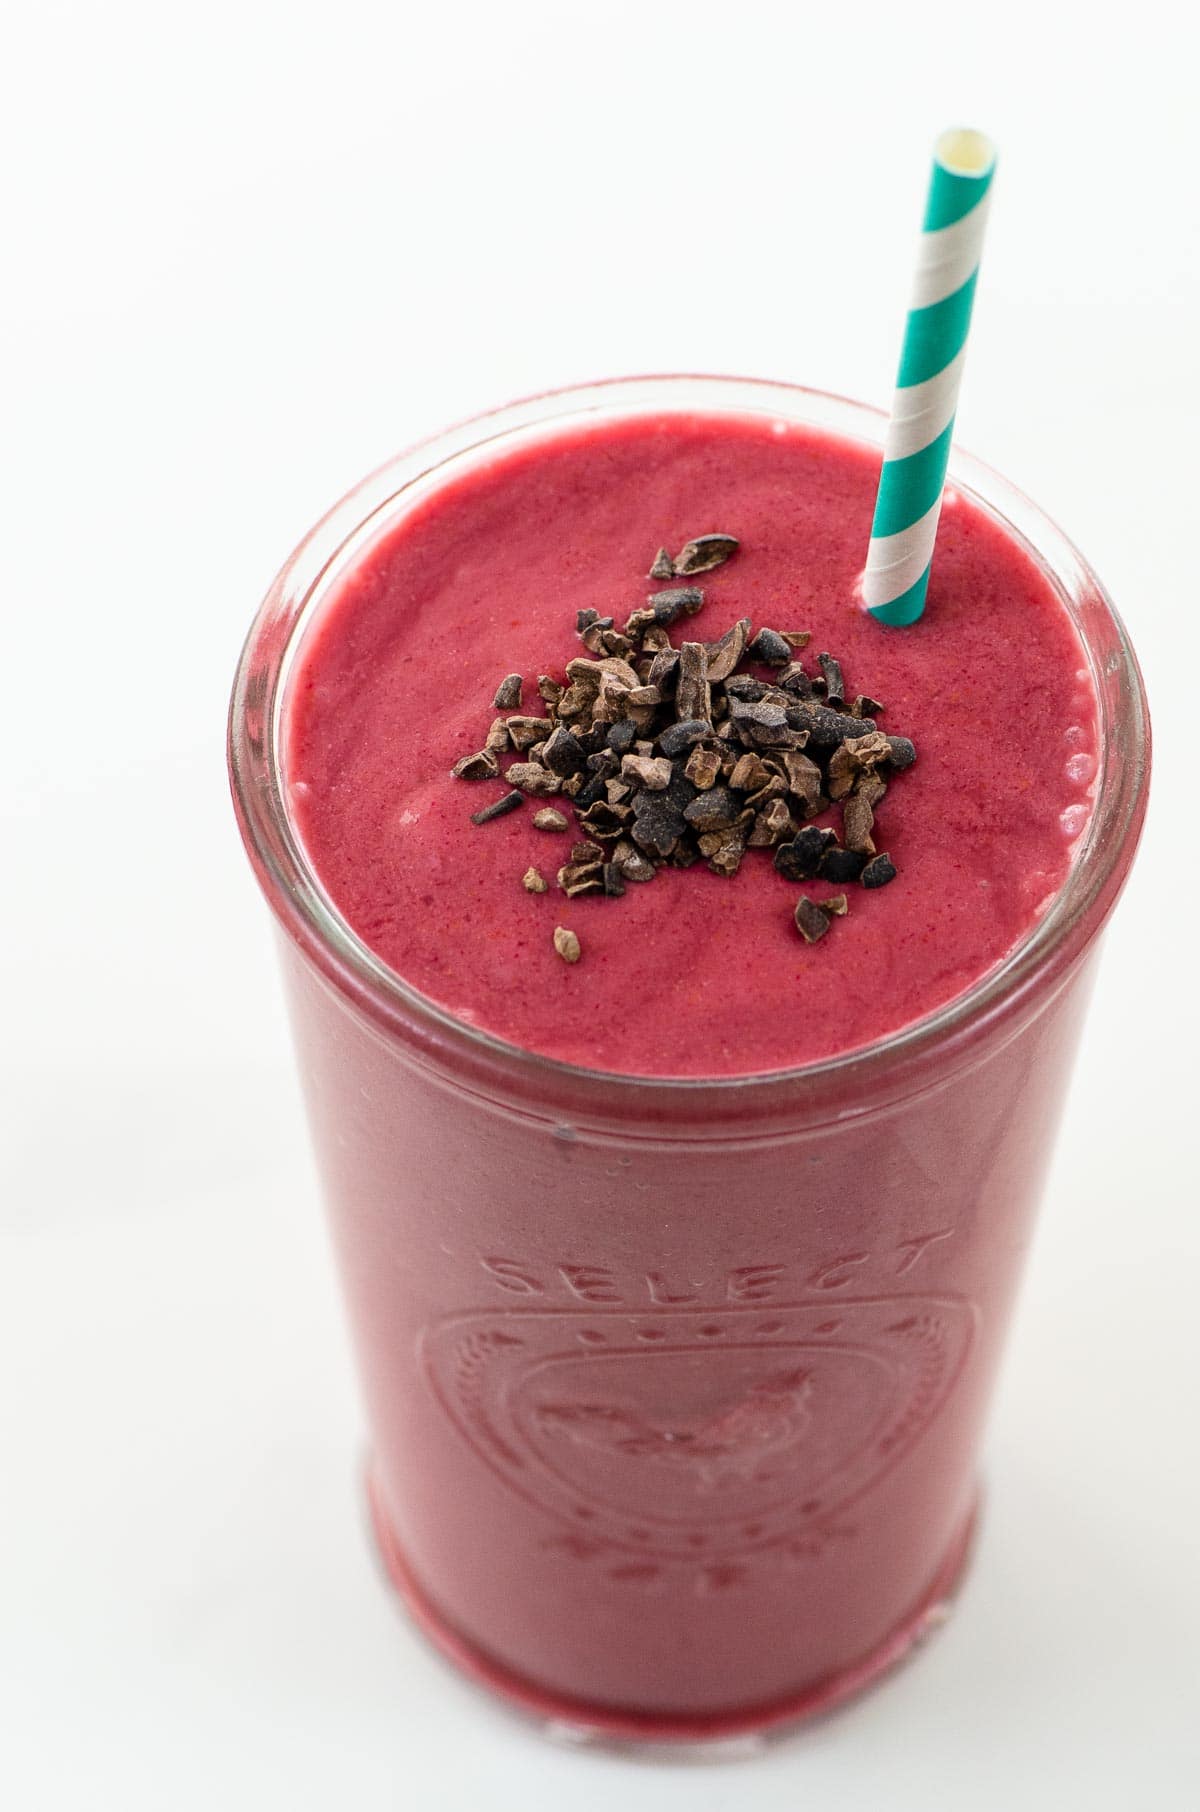 Smoothie basics raspberry banana smoothie with a paper straw